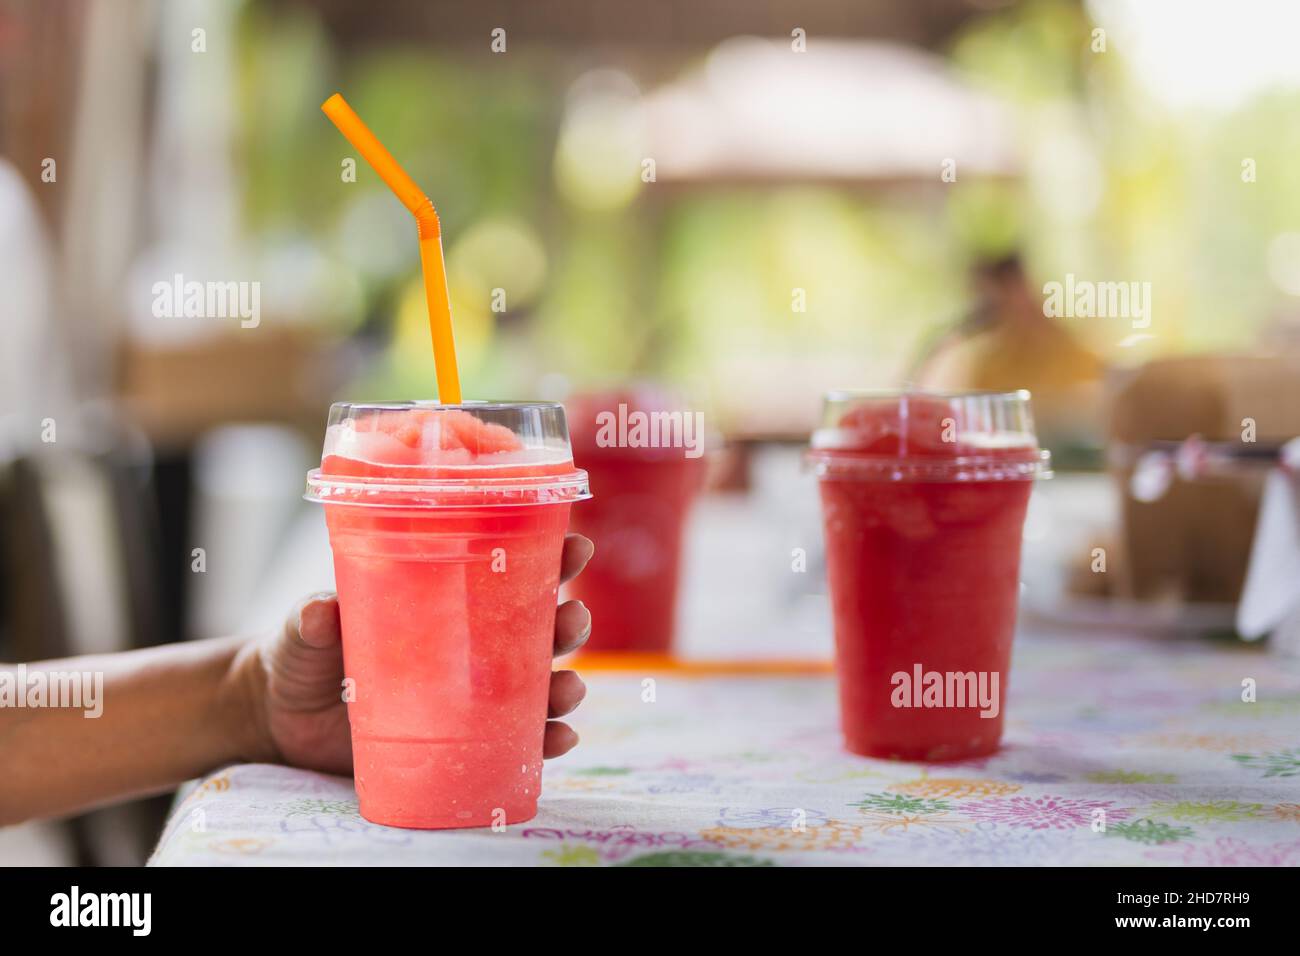 Female hand holding strawberry smoothie drink in plastic cup. Stock Photo